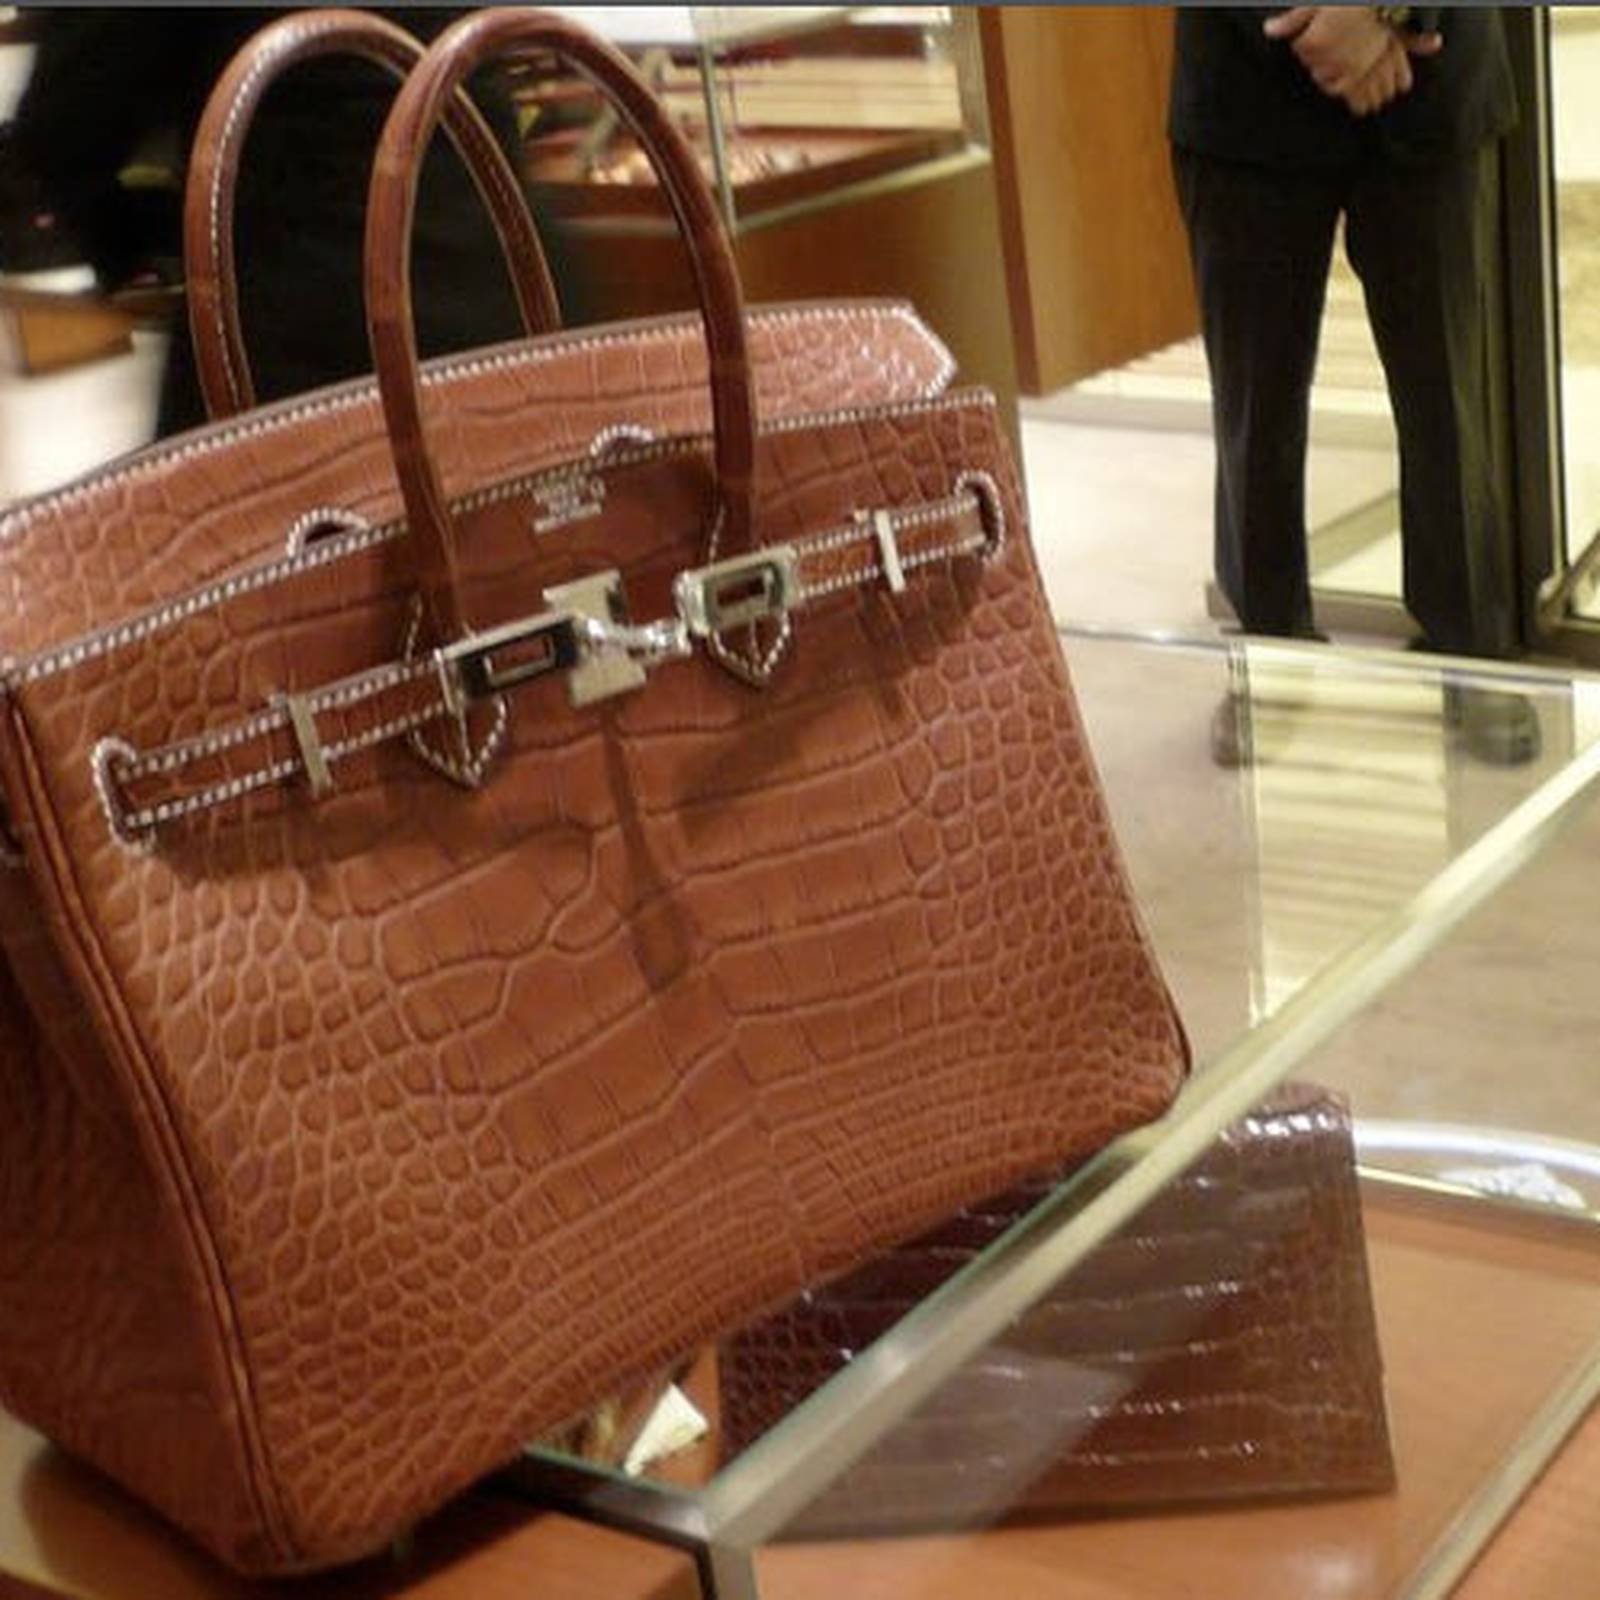 Footage Shows Crocodiles Skinned Alive For Louis Vuitton Purses